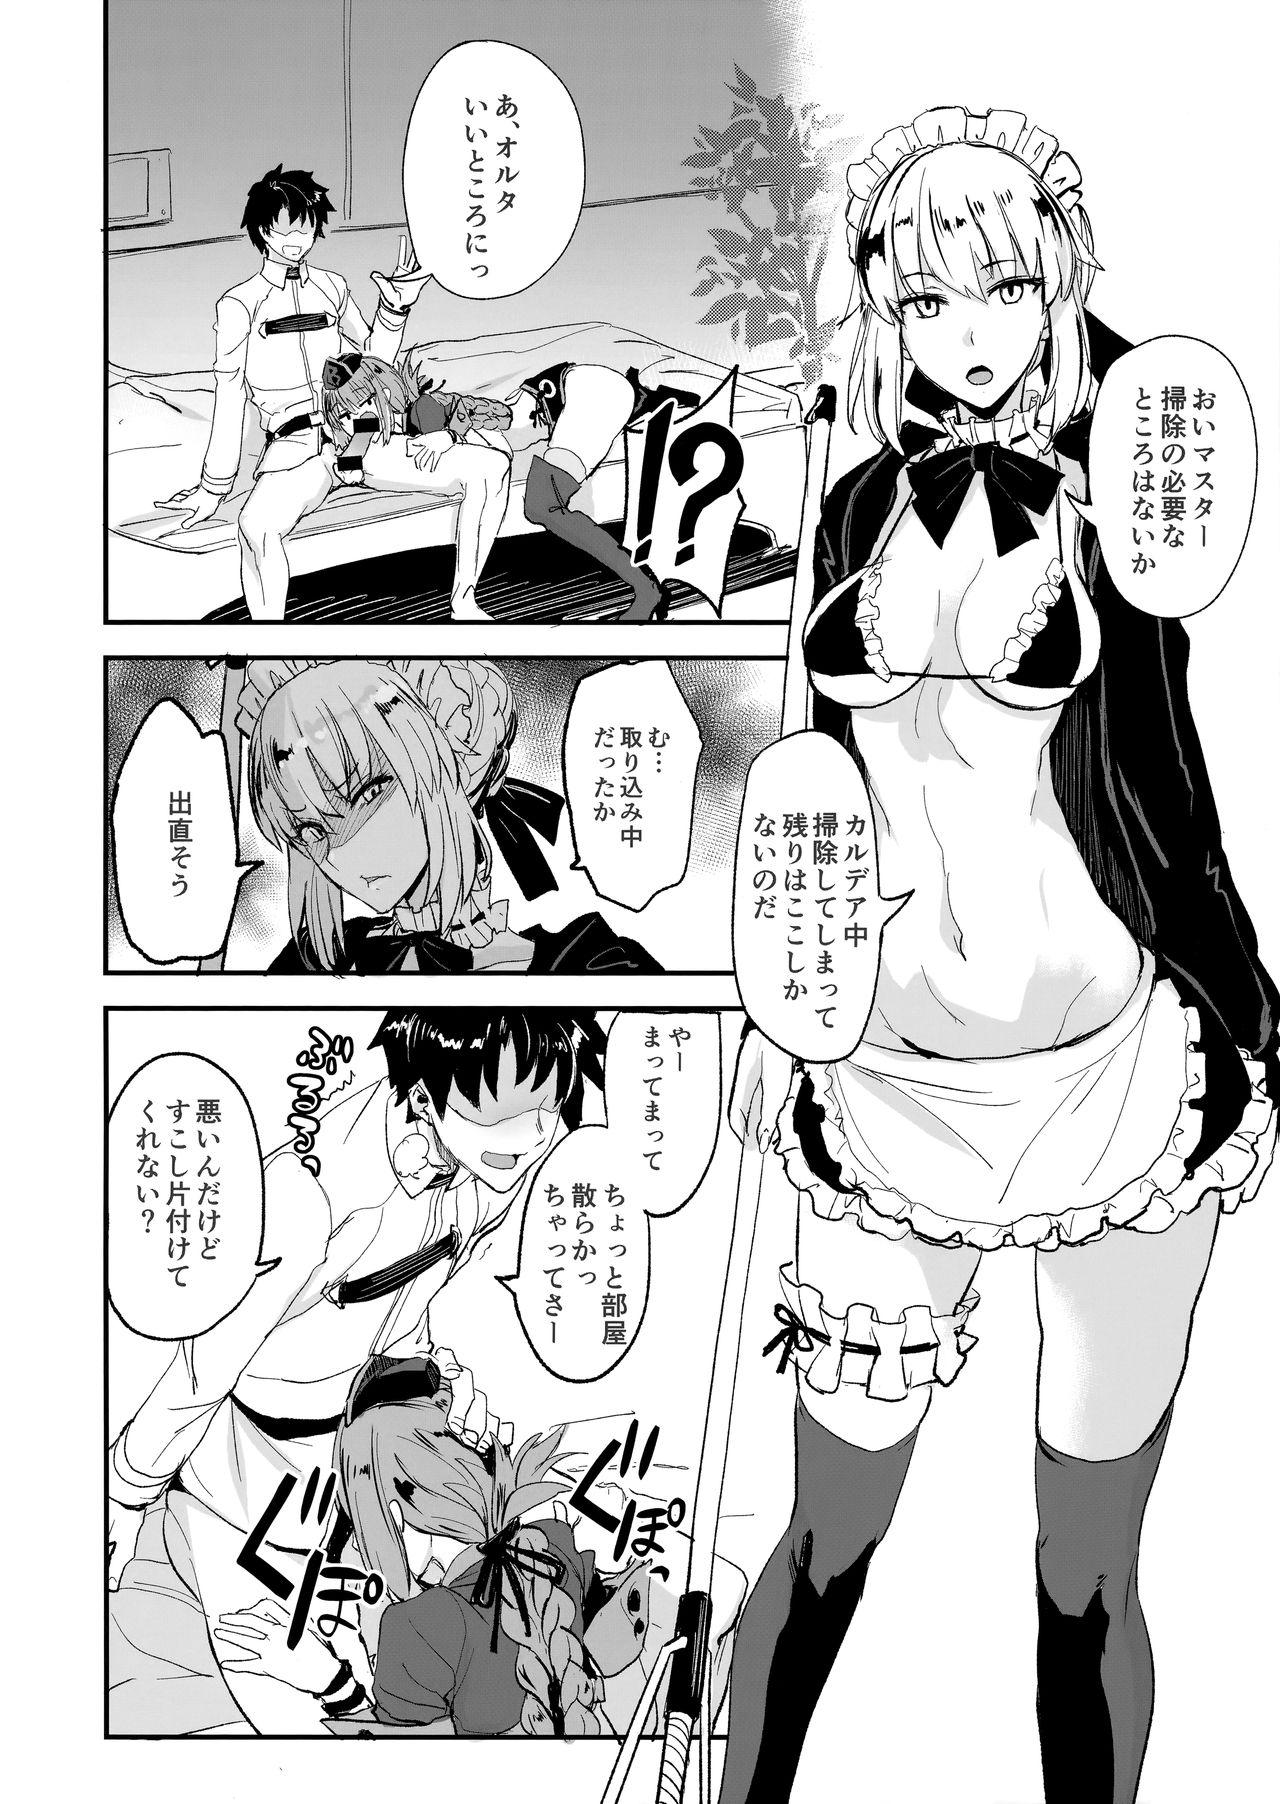 Hot Girls Getting Fucked FGO no Erohon 2 - Fate grand order Bang - Page 5